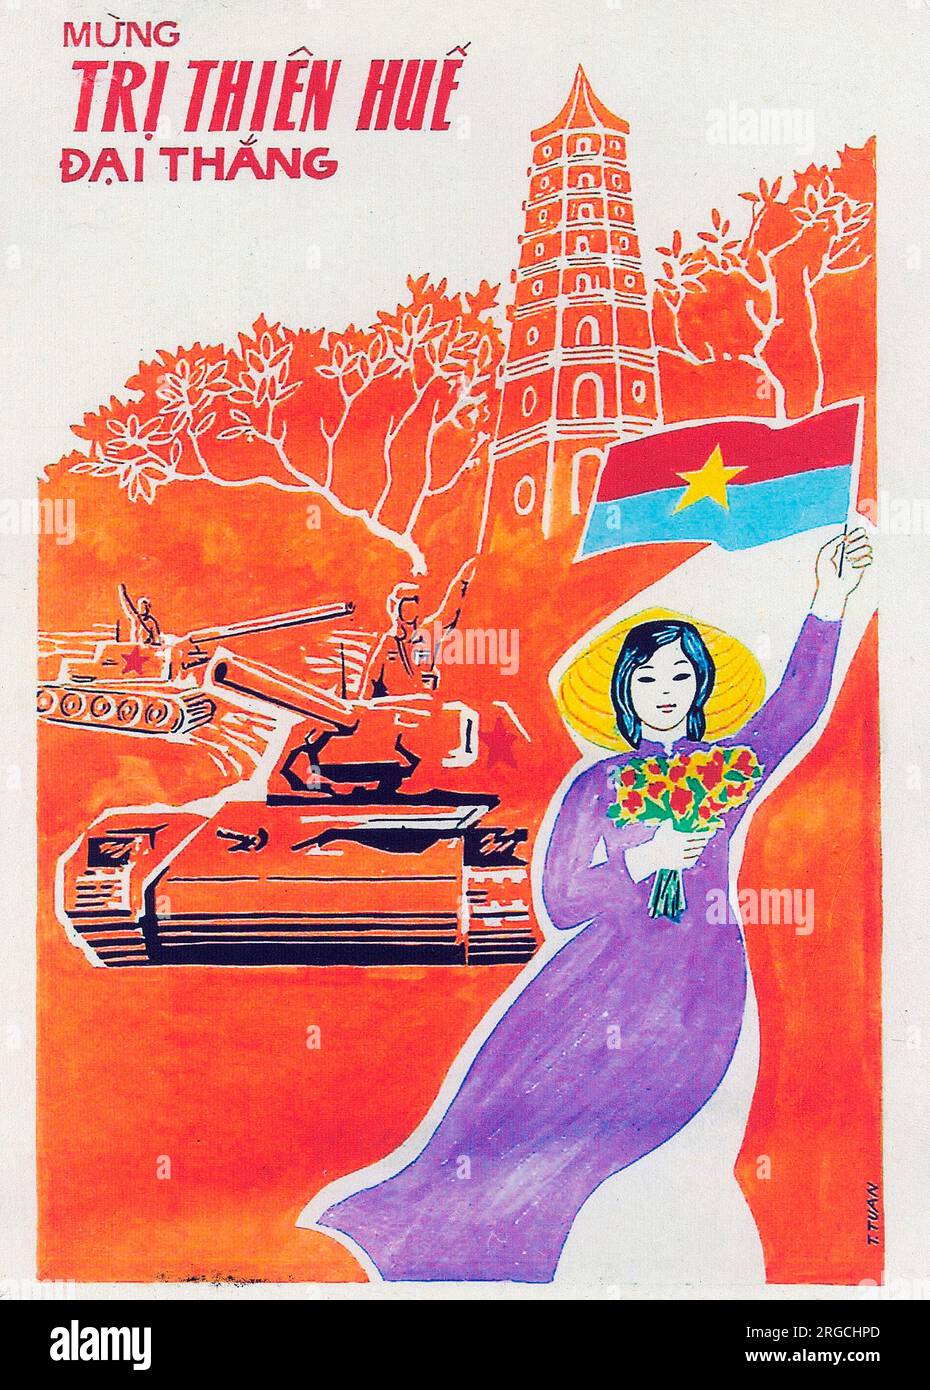 Vietnamese Patriotic Poster - Good luck! And good luck for Victory' Stock Photo